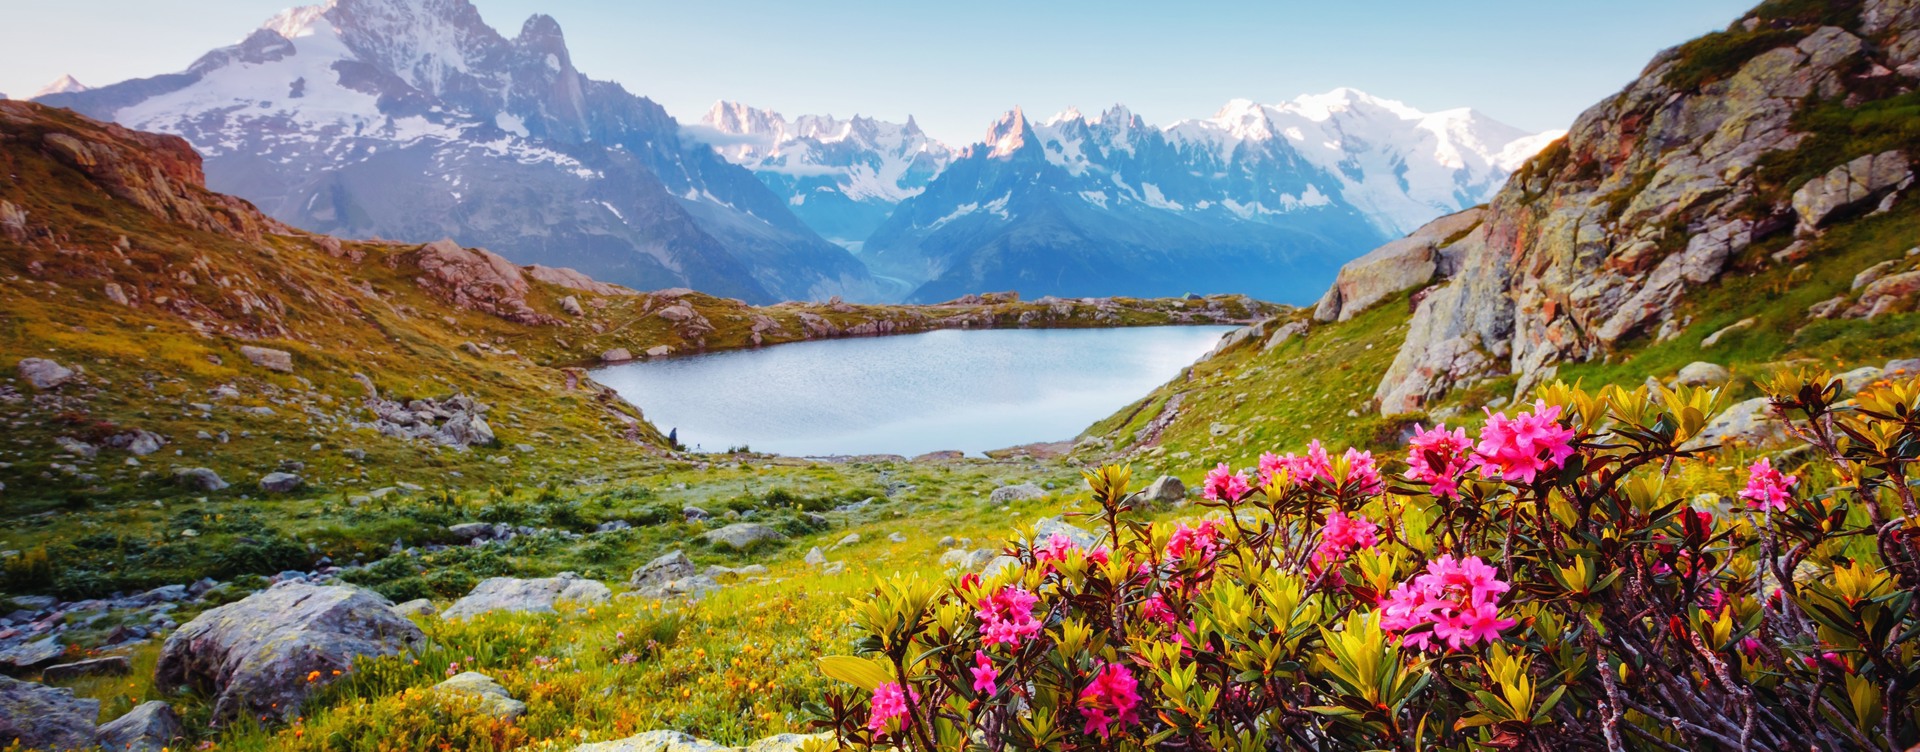 Enjoy the perfect summer temperature
in the French Alps